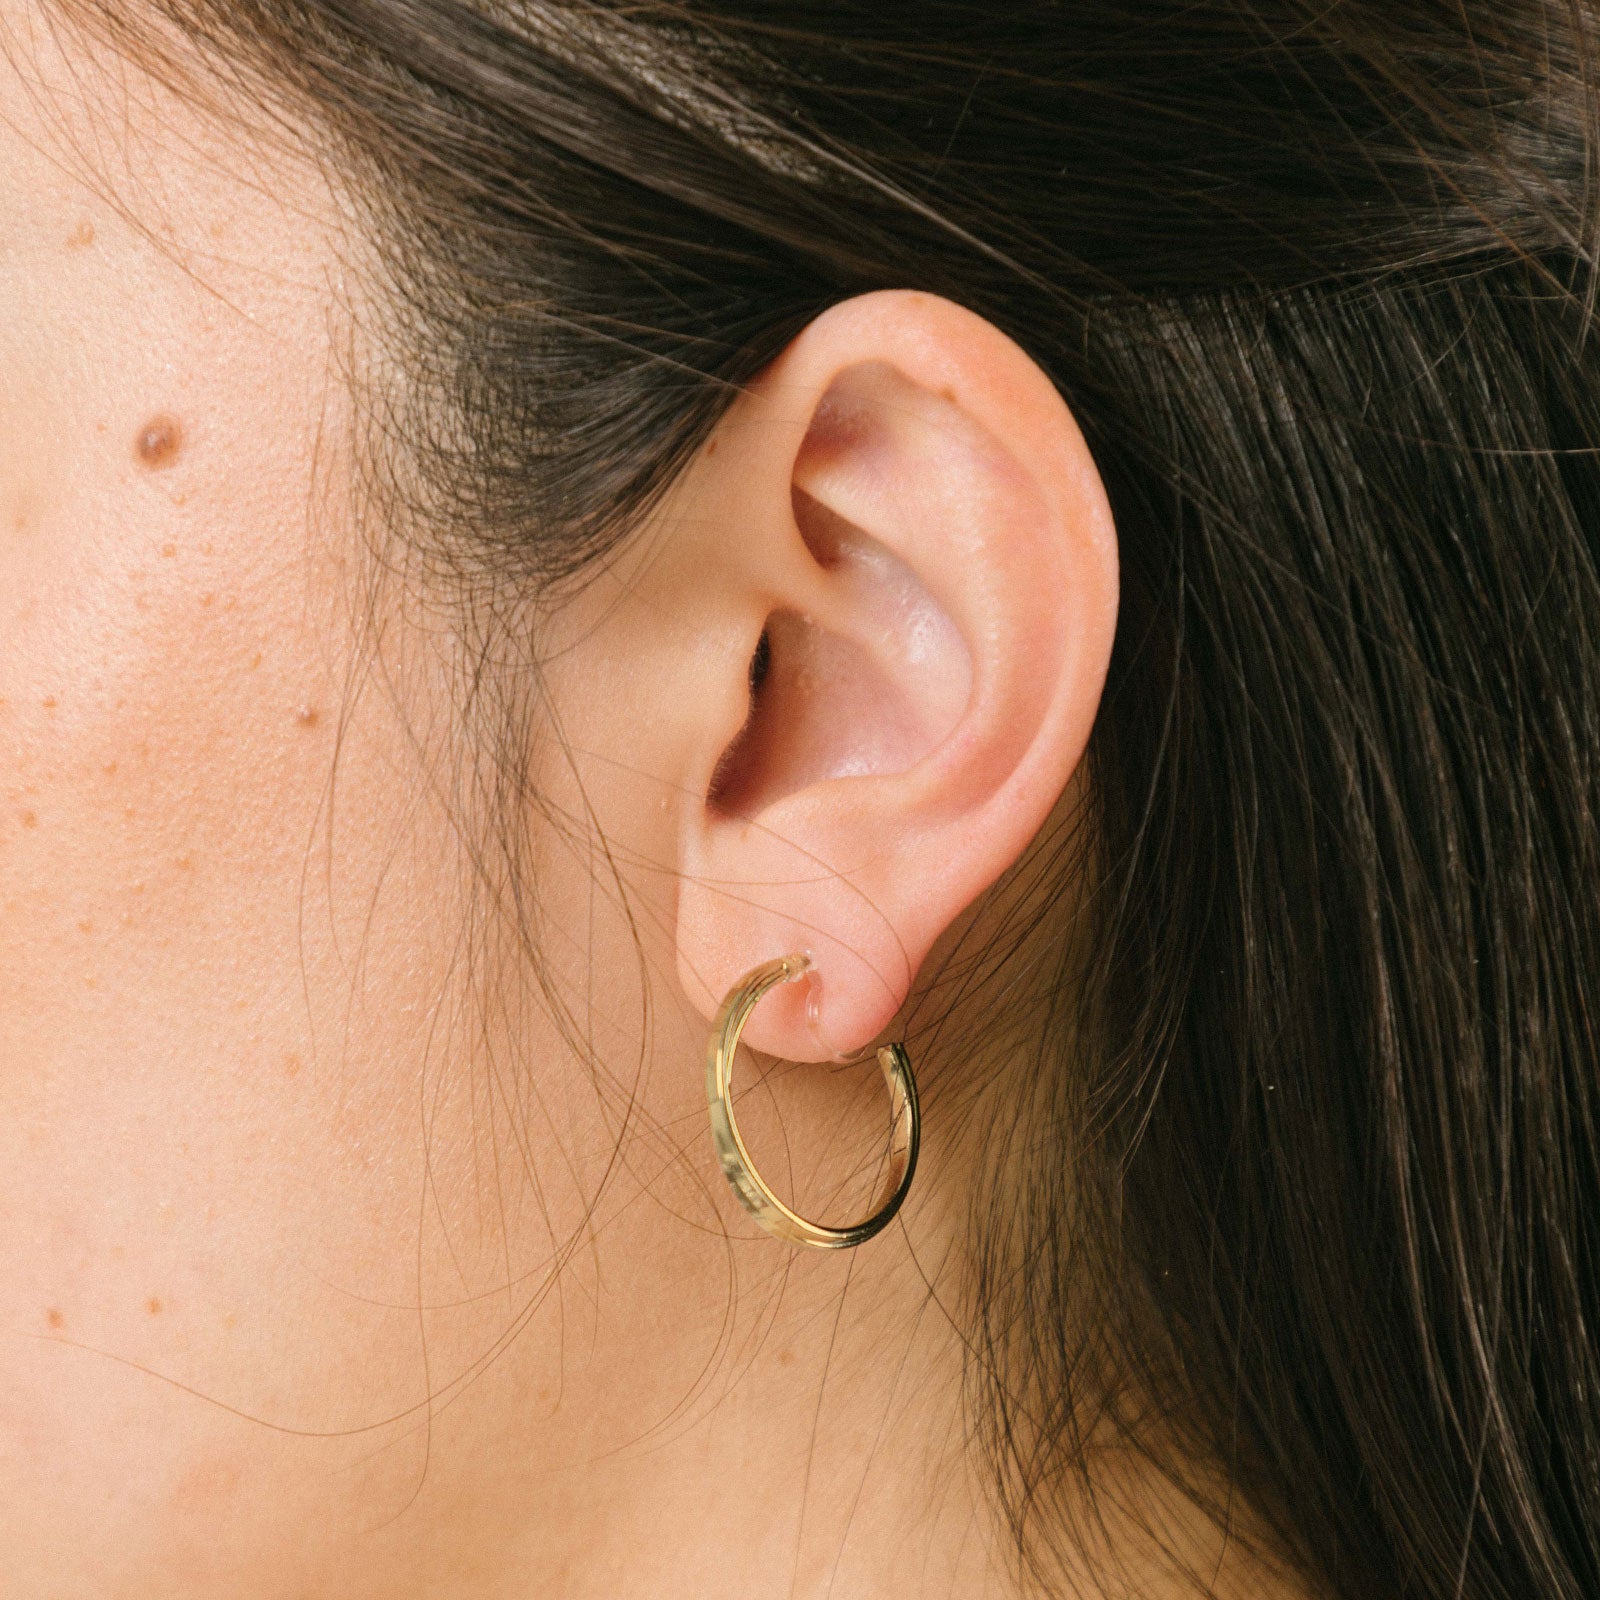 A model wearing the Gold Cassie Hoop Clip-On Earrings feature a resin closure, making them ideal for all ear types, including thick/large ears, sensitive ears, small/thin ears, and stretched/healing ears. On average, pairs are comfortably worn for 8-12 hours with a medium secure hold, and they are not adjustable. This item is sold as a single pair and is also available in Silver. The earrings are constructed with gold-tone metal alloy.